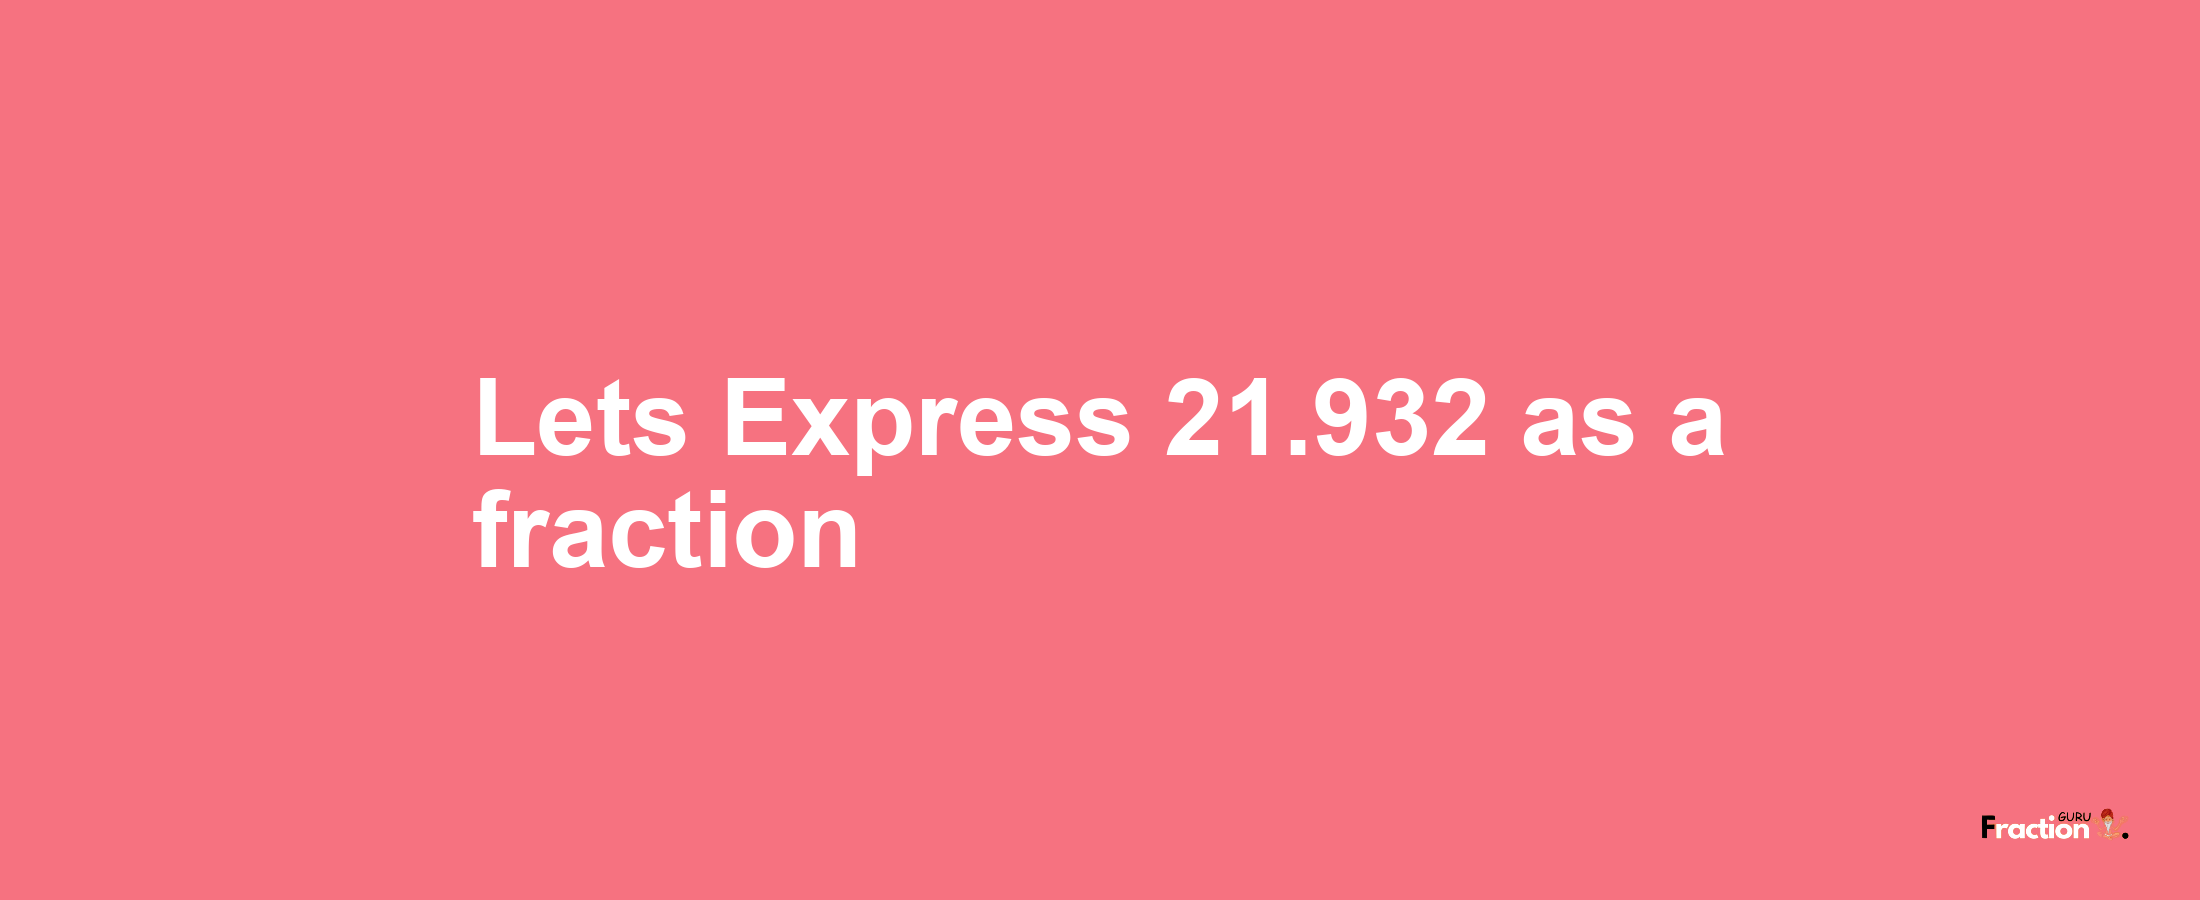 Lets Express 21.932 as afraction